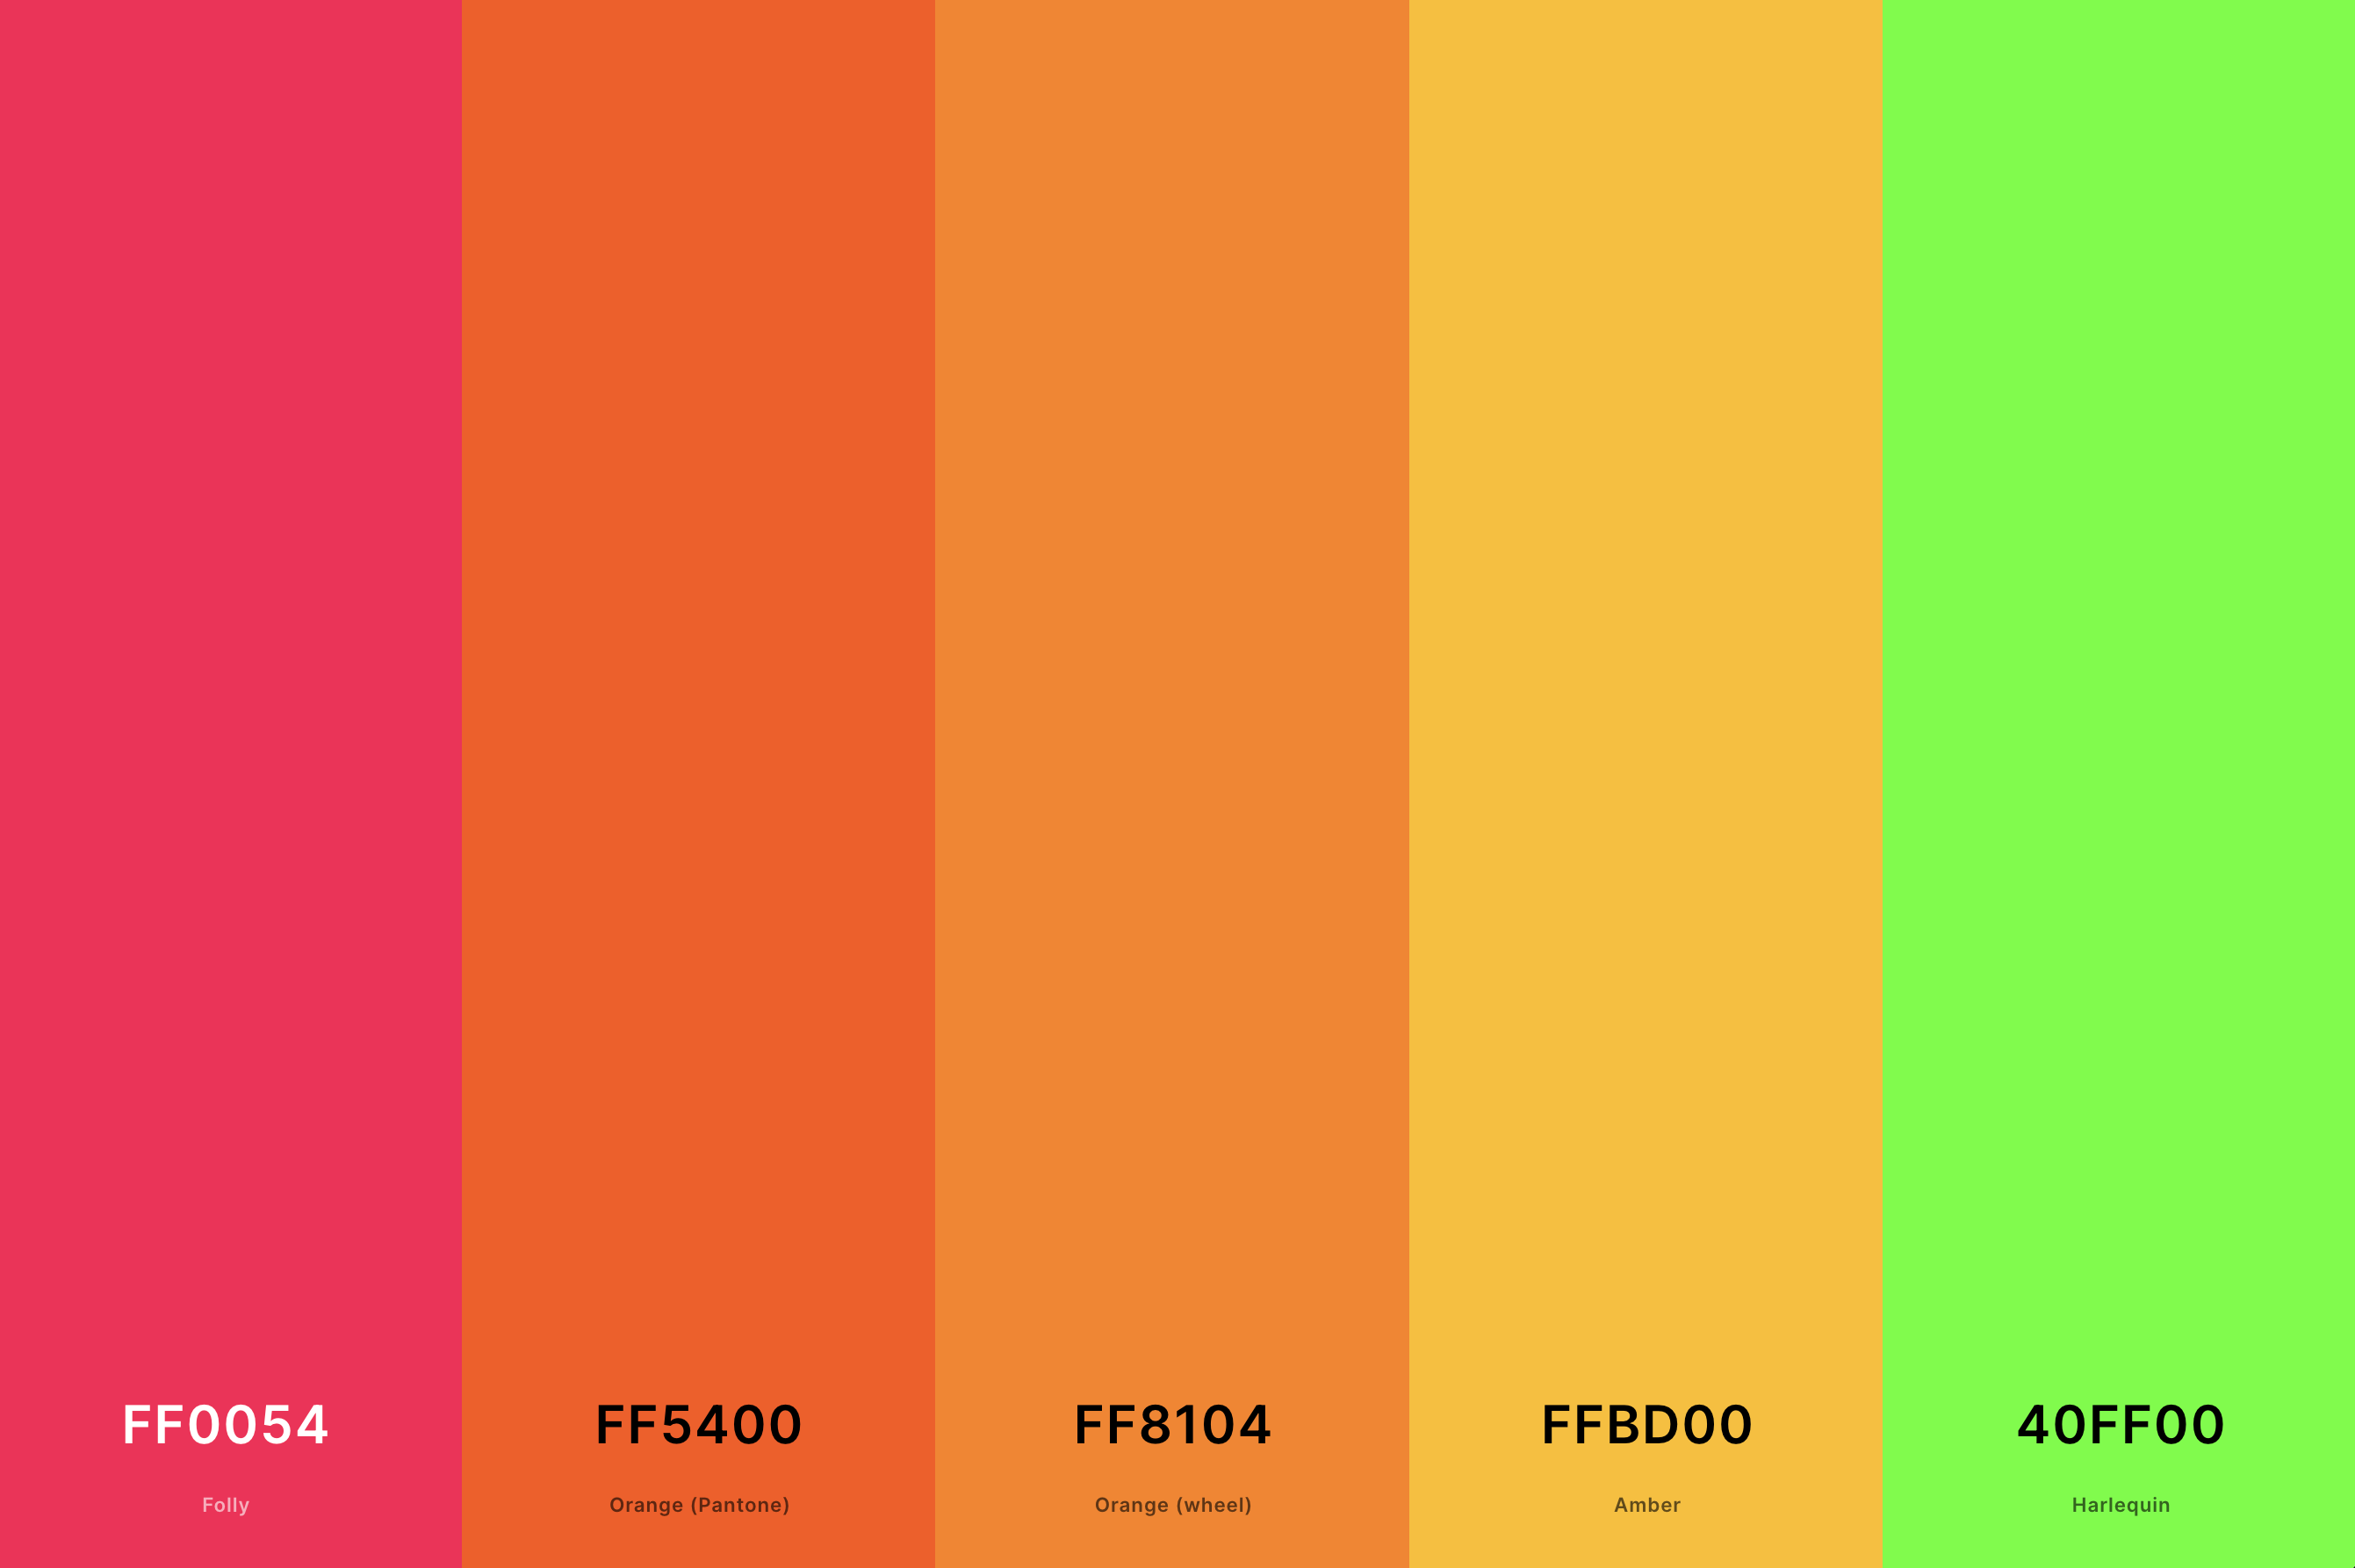 9. Neon Orange Color Palette Color Palette with Folly (Hex #FF0054) + Orange (Pantone) (Hex #FF5400) + Orange (Wheel) (Hex #FF8104) + Amber (Hex #FFBD00) + Harlequin (Hex #40FF00) Color Palette with Hex Codes